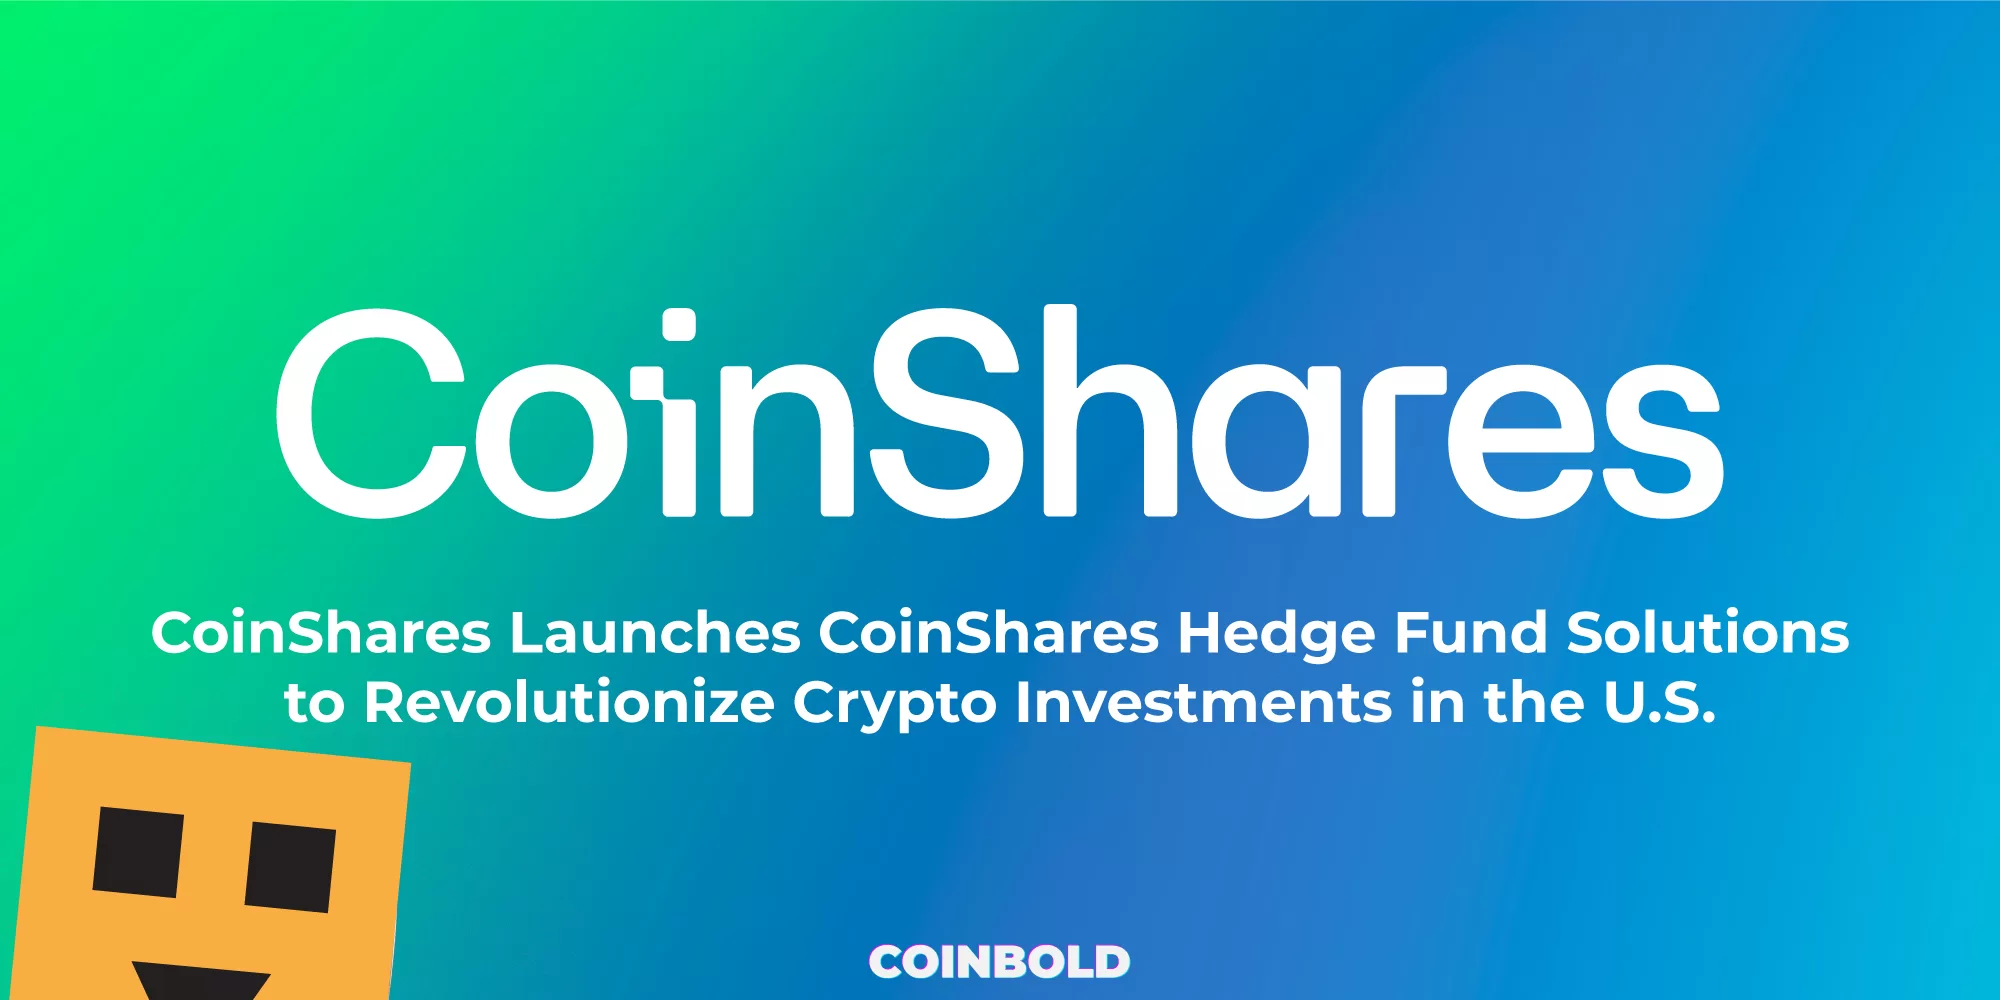 CoinShares Launches CoinShares Hedge Fund Solutions to Revolutionize Crypto Investments in the U.S